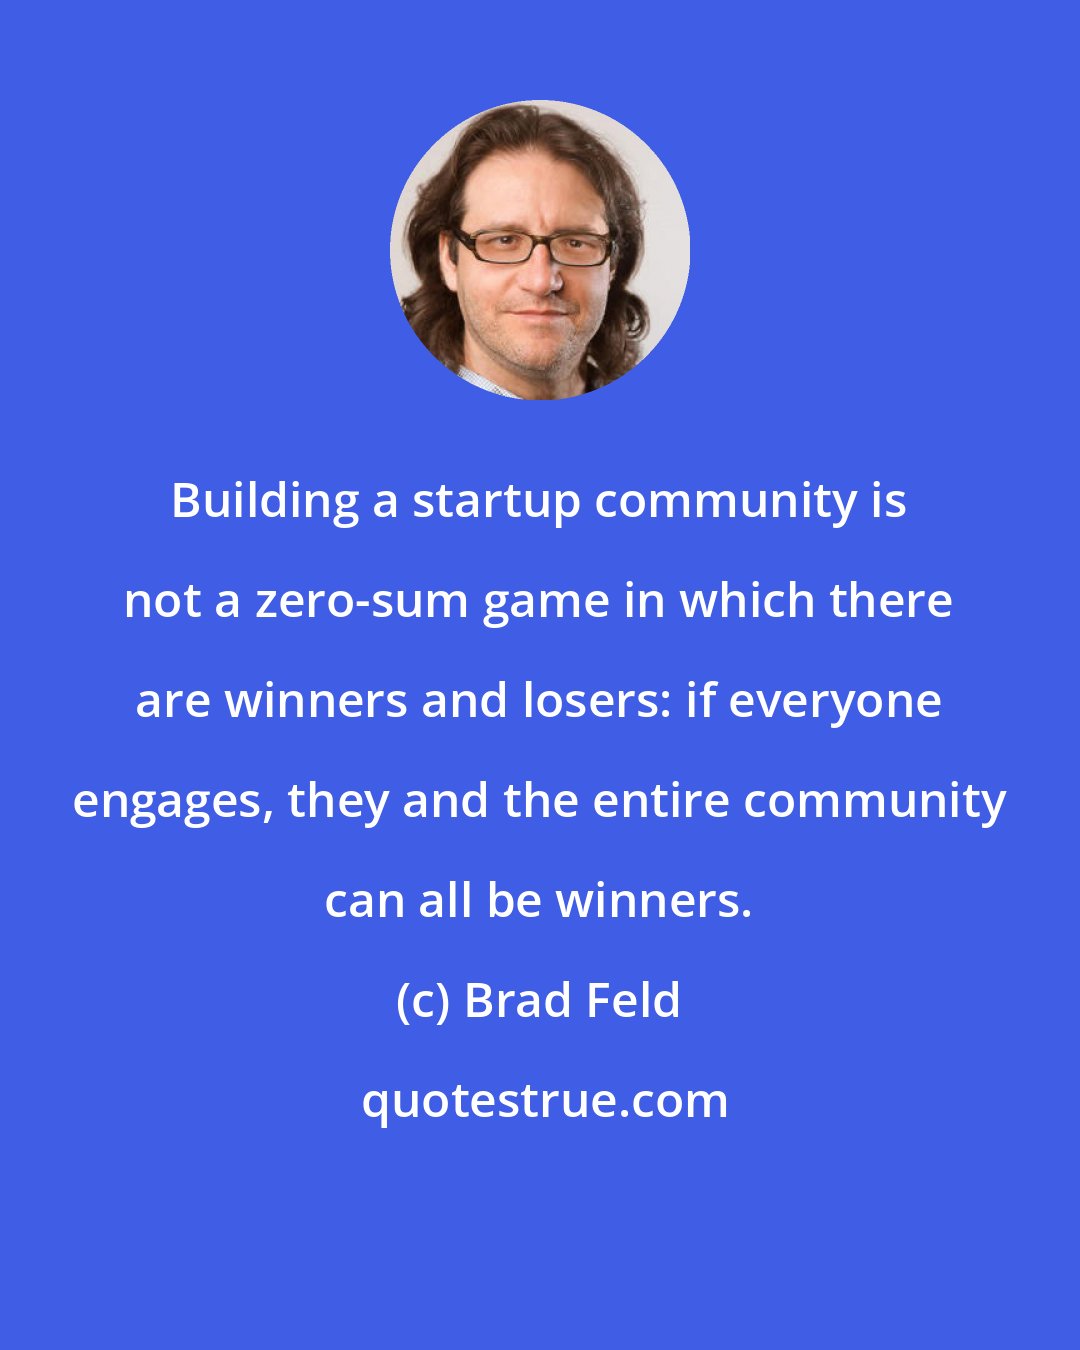 Brad Feld: Building a startup community is not a zero-sum game in which there are winners and losers: if everyone engages, they and the entire community can all be winners.